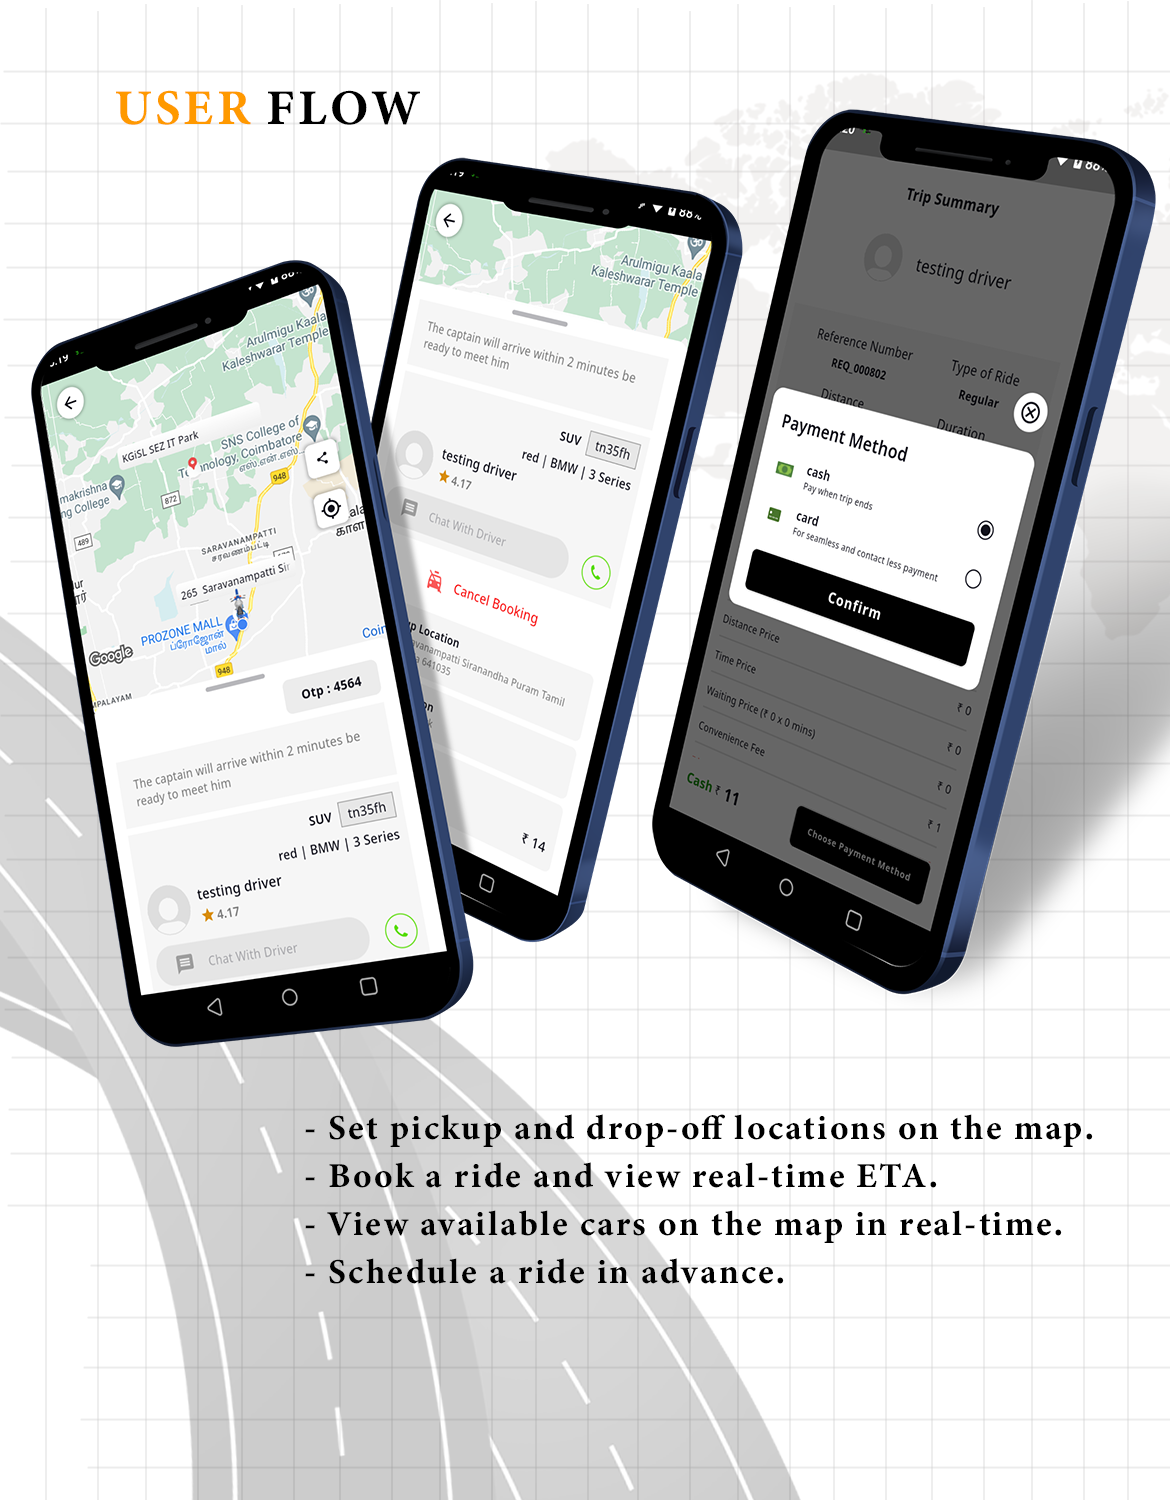 Tagxi Super Bidding - Taxi + Goods Delivery Complete Solution With Bidding Option - 13